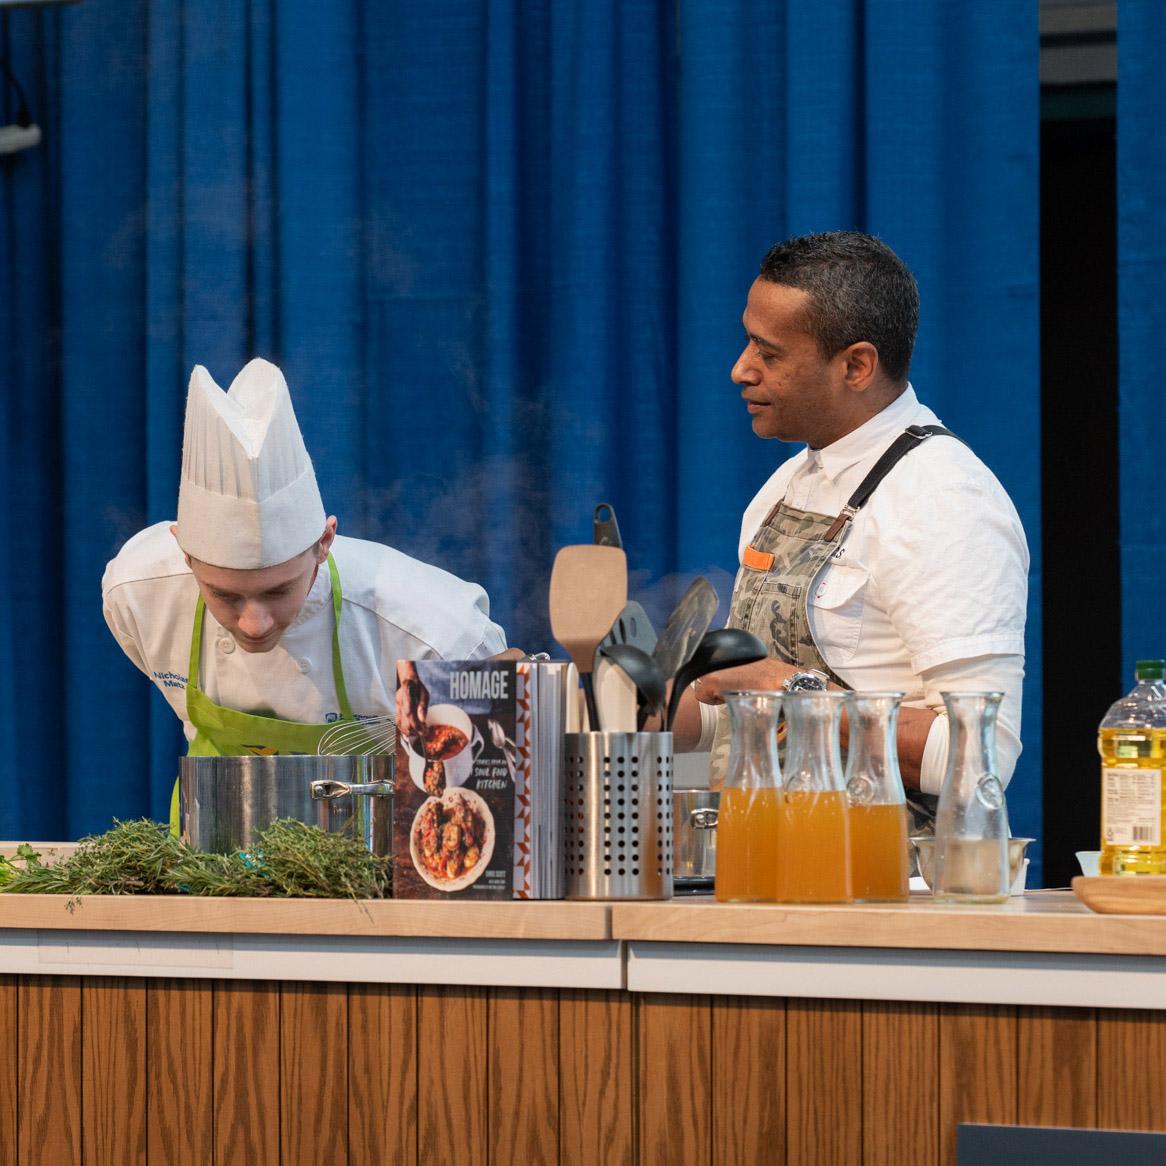 Culinary arts technology student Nicholas P. Matz, of Schuylkill Haven, is encouraged to catch the aroma of a recipe-in-progress as he assists Chef Chris Scott (right), a finalist on Season 15 of Bravo’s “Top Chef” television series and a judge on “Beat Bobby Flay.”